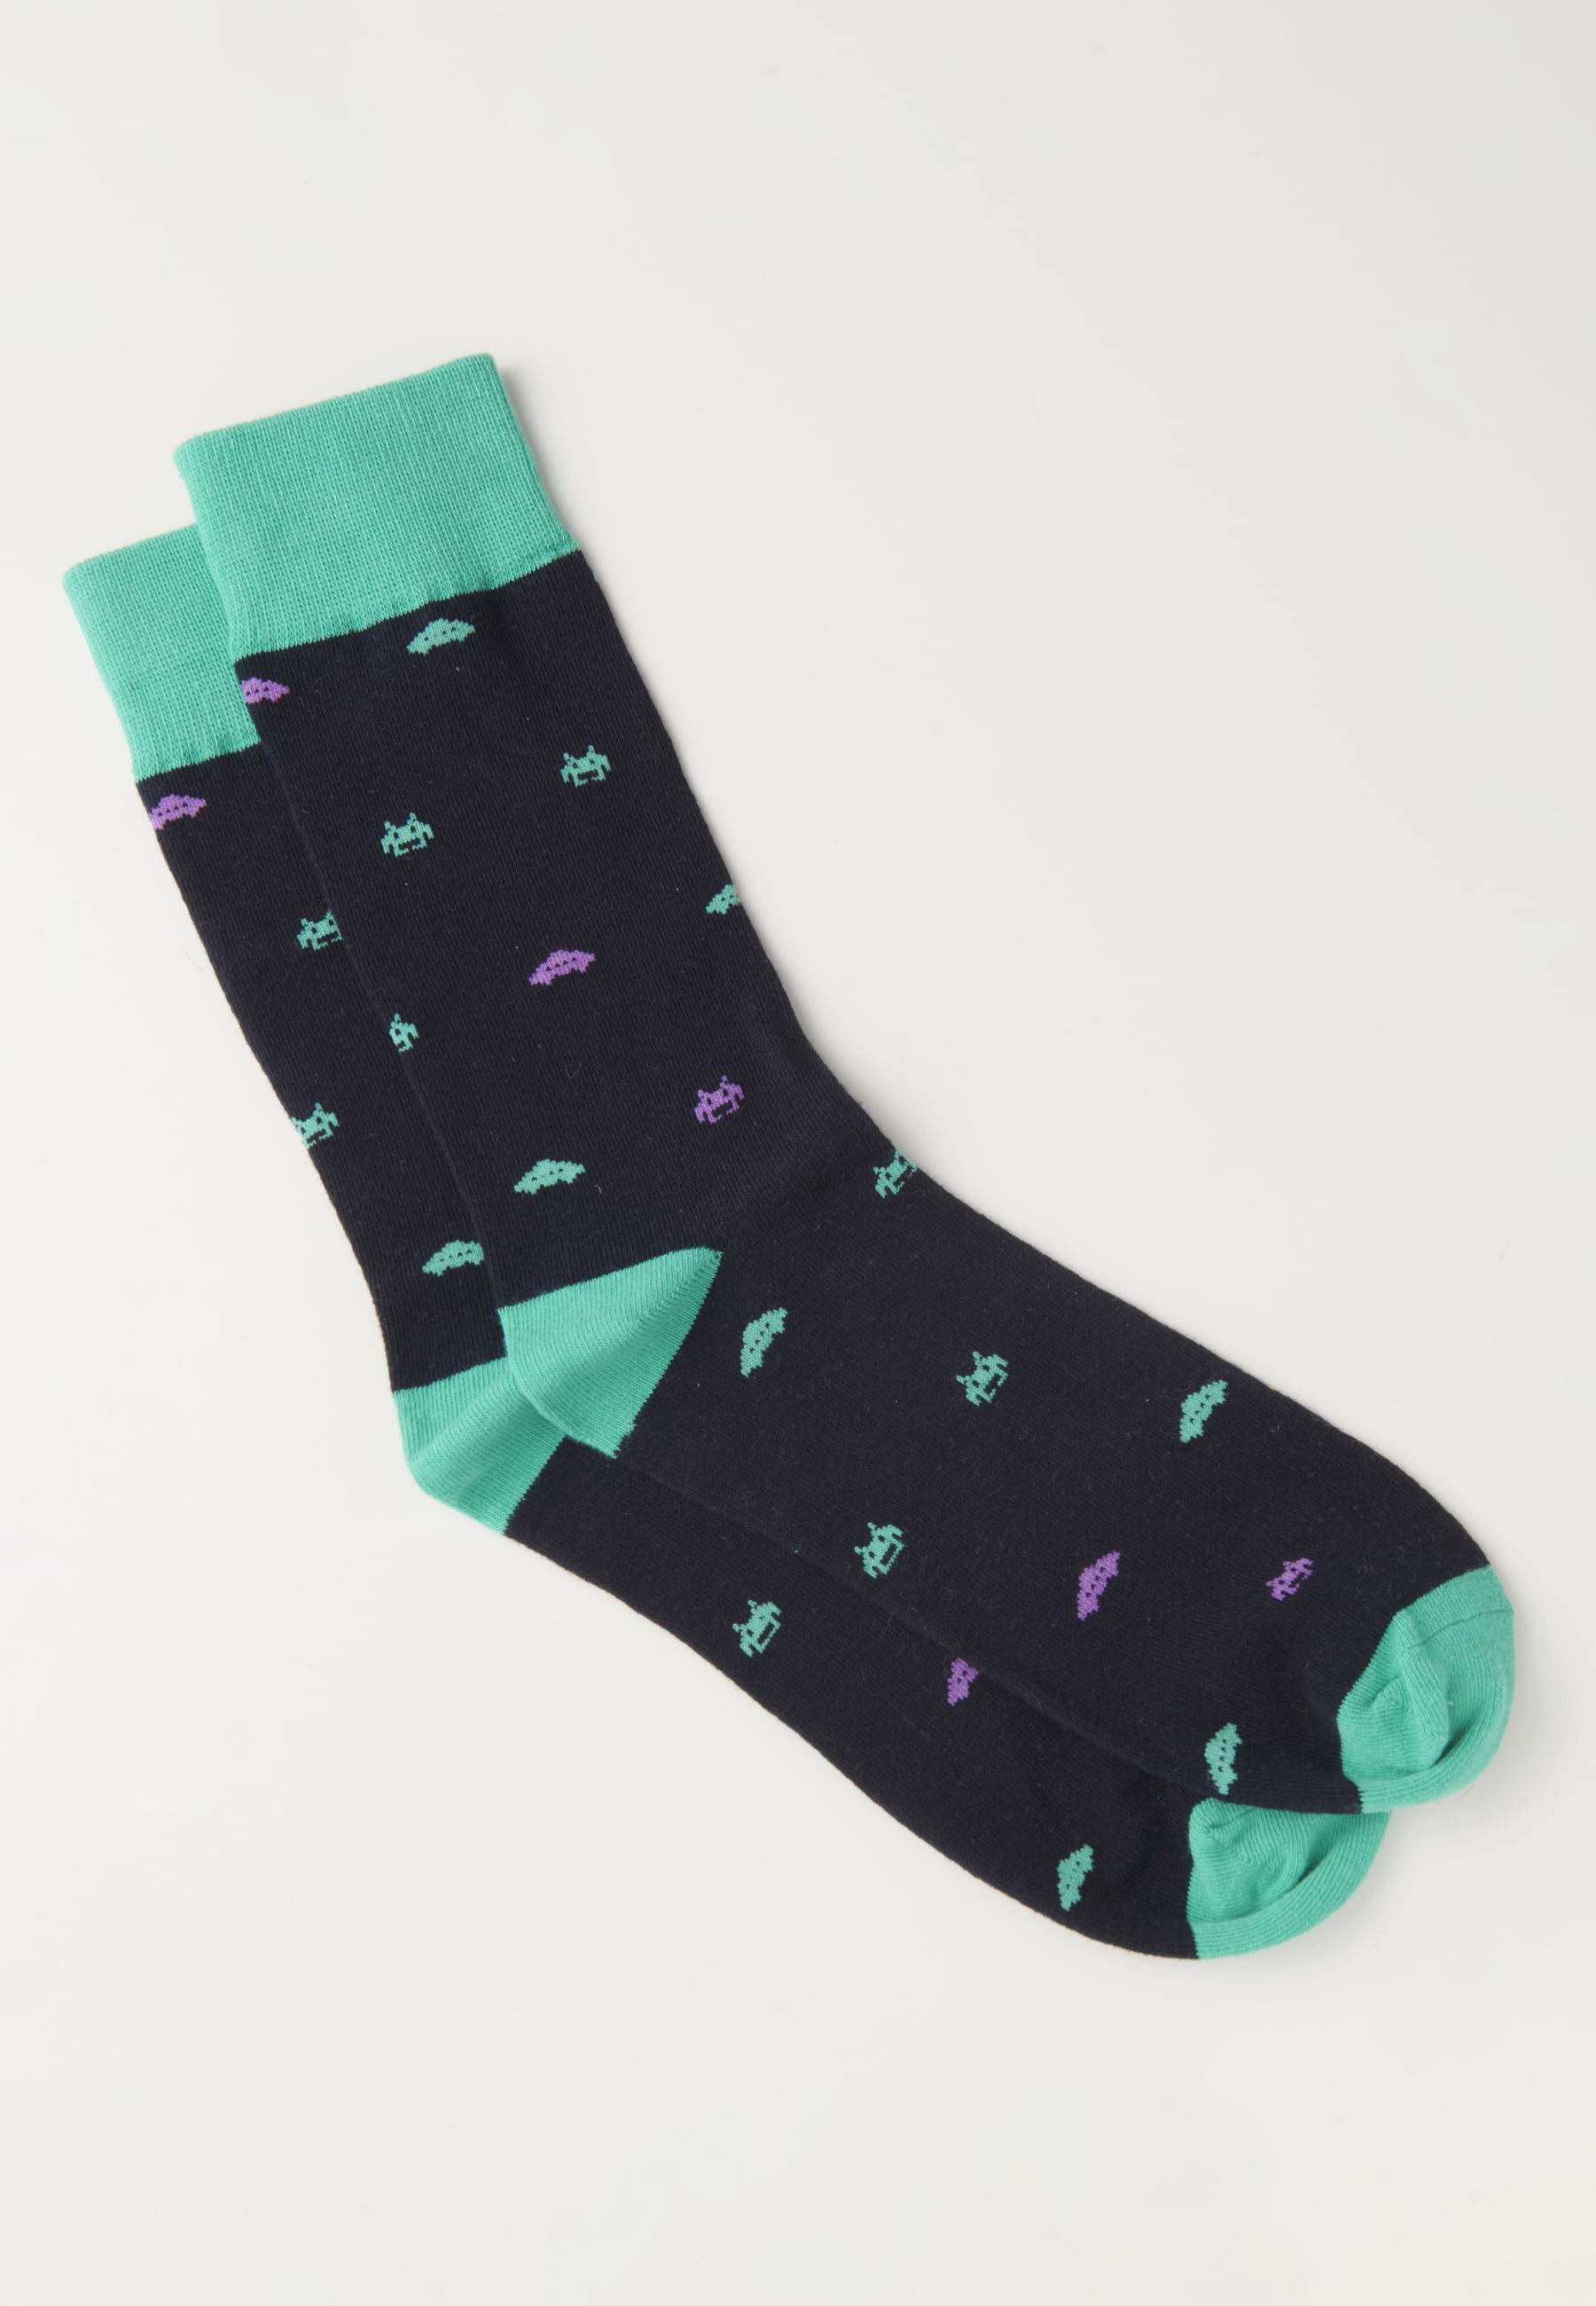 Pack of three socks in different colors for Men